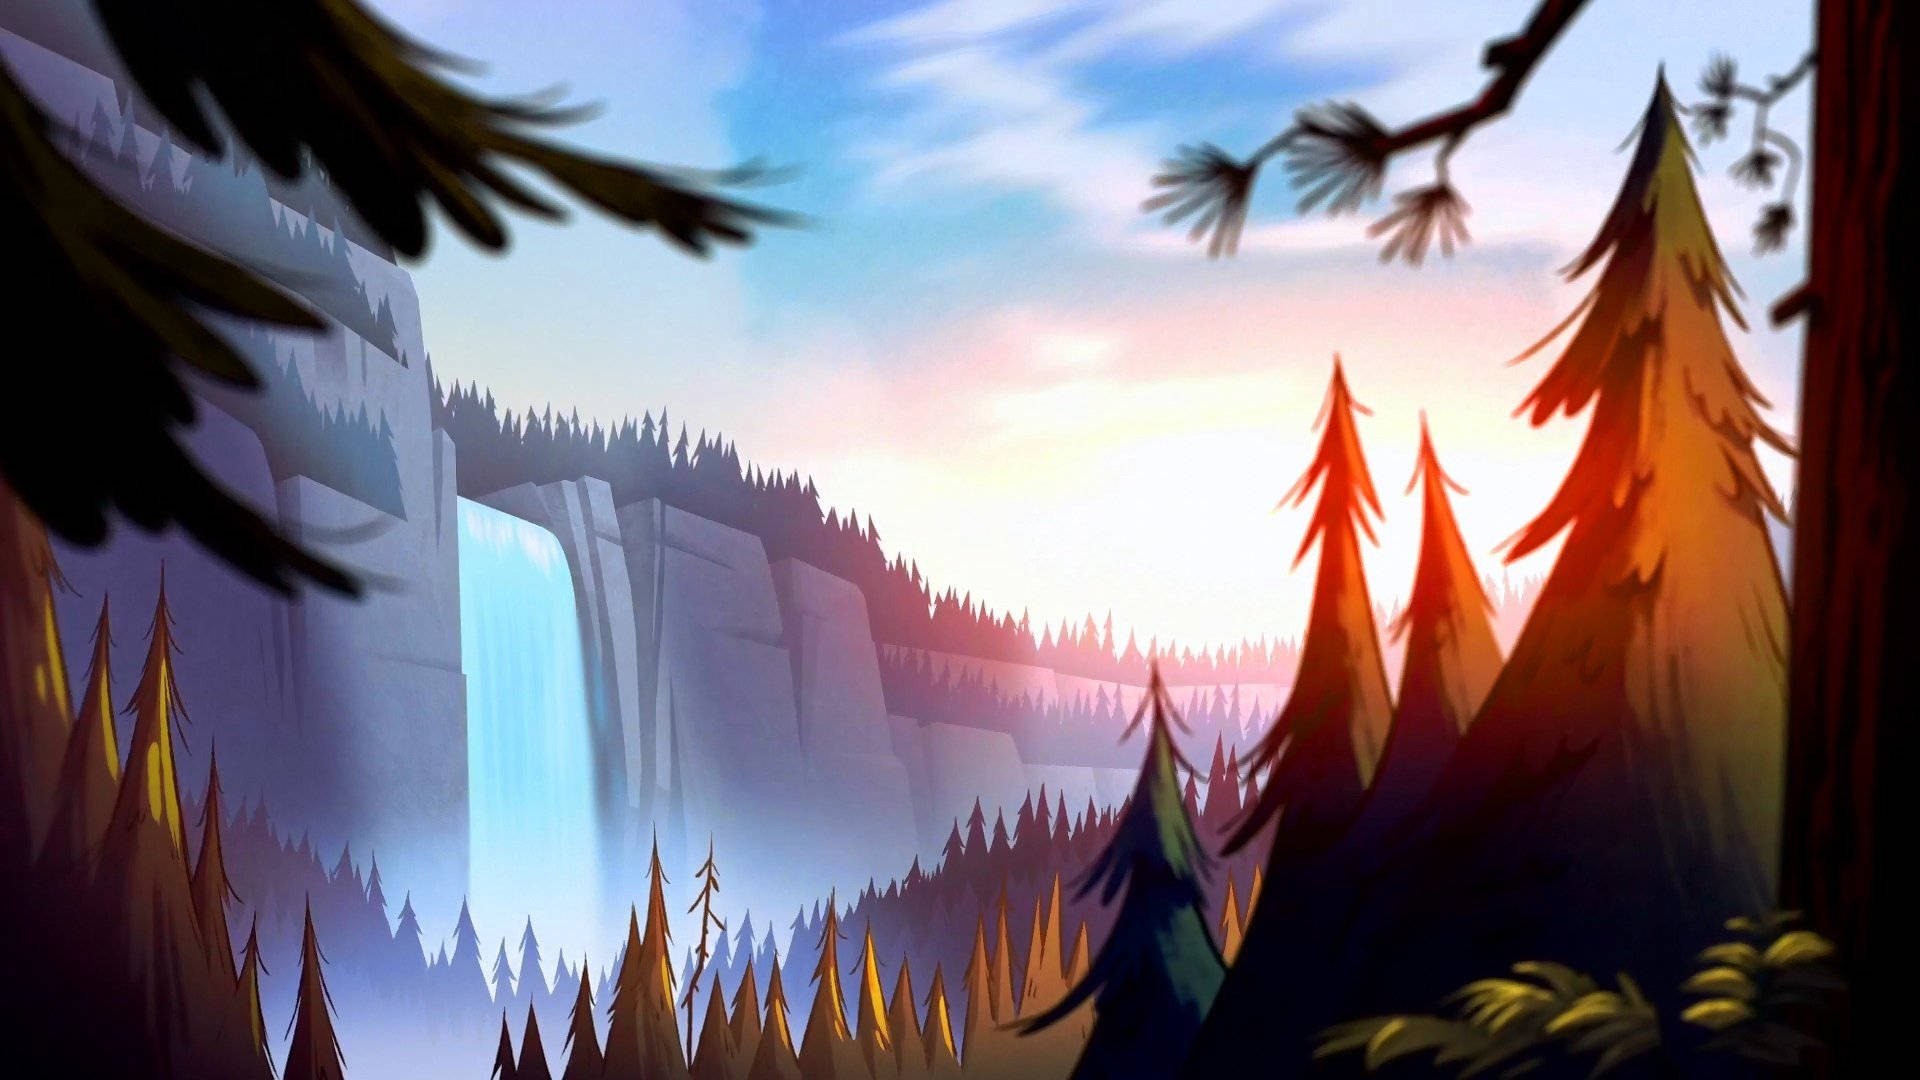 Relax and Unwind in the Majestic Views of Gravity Falls Wallpaper